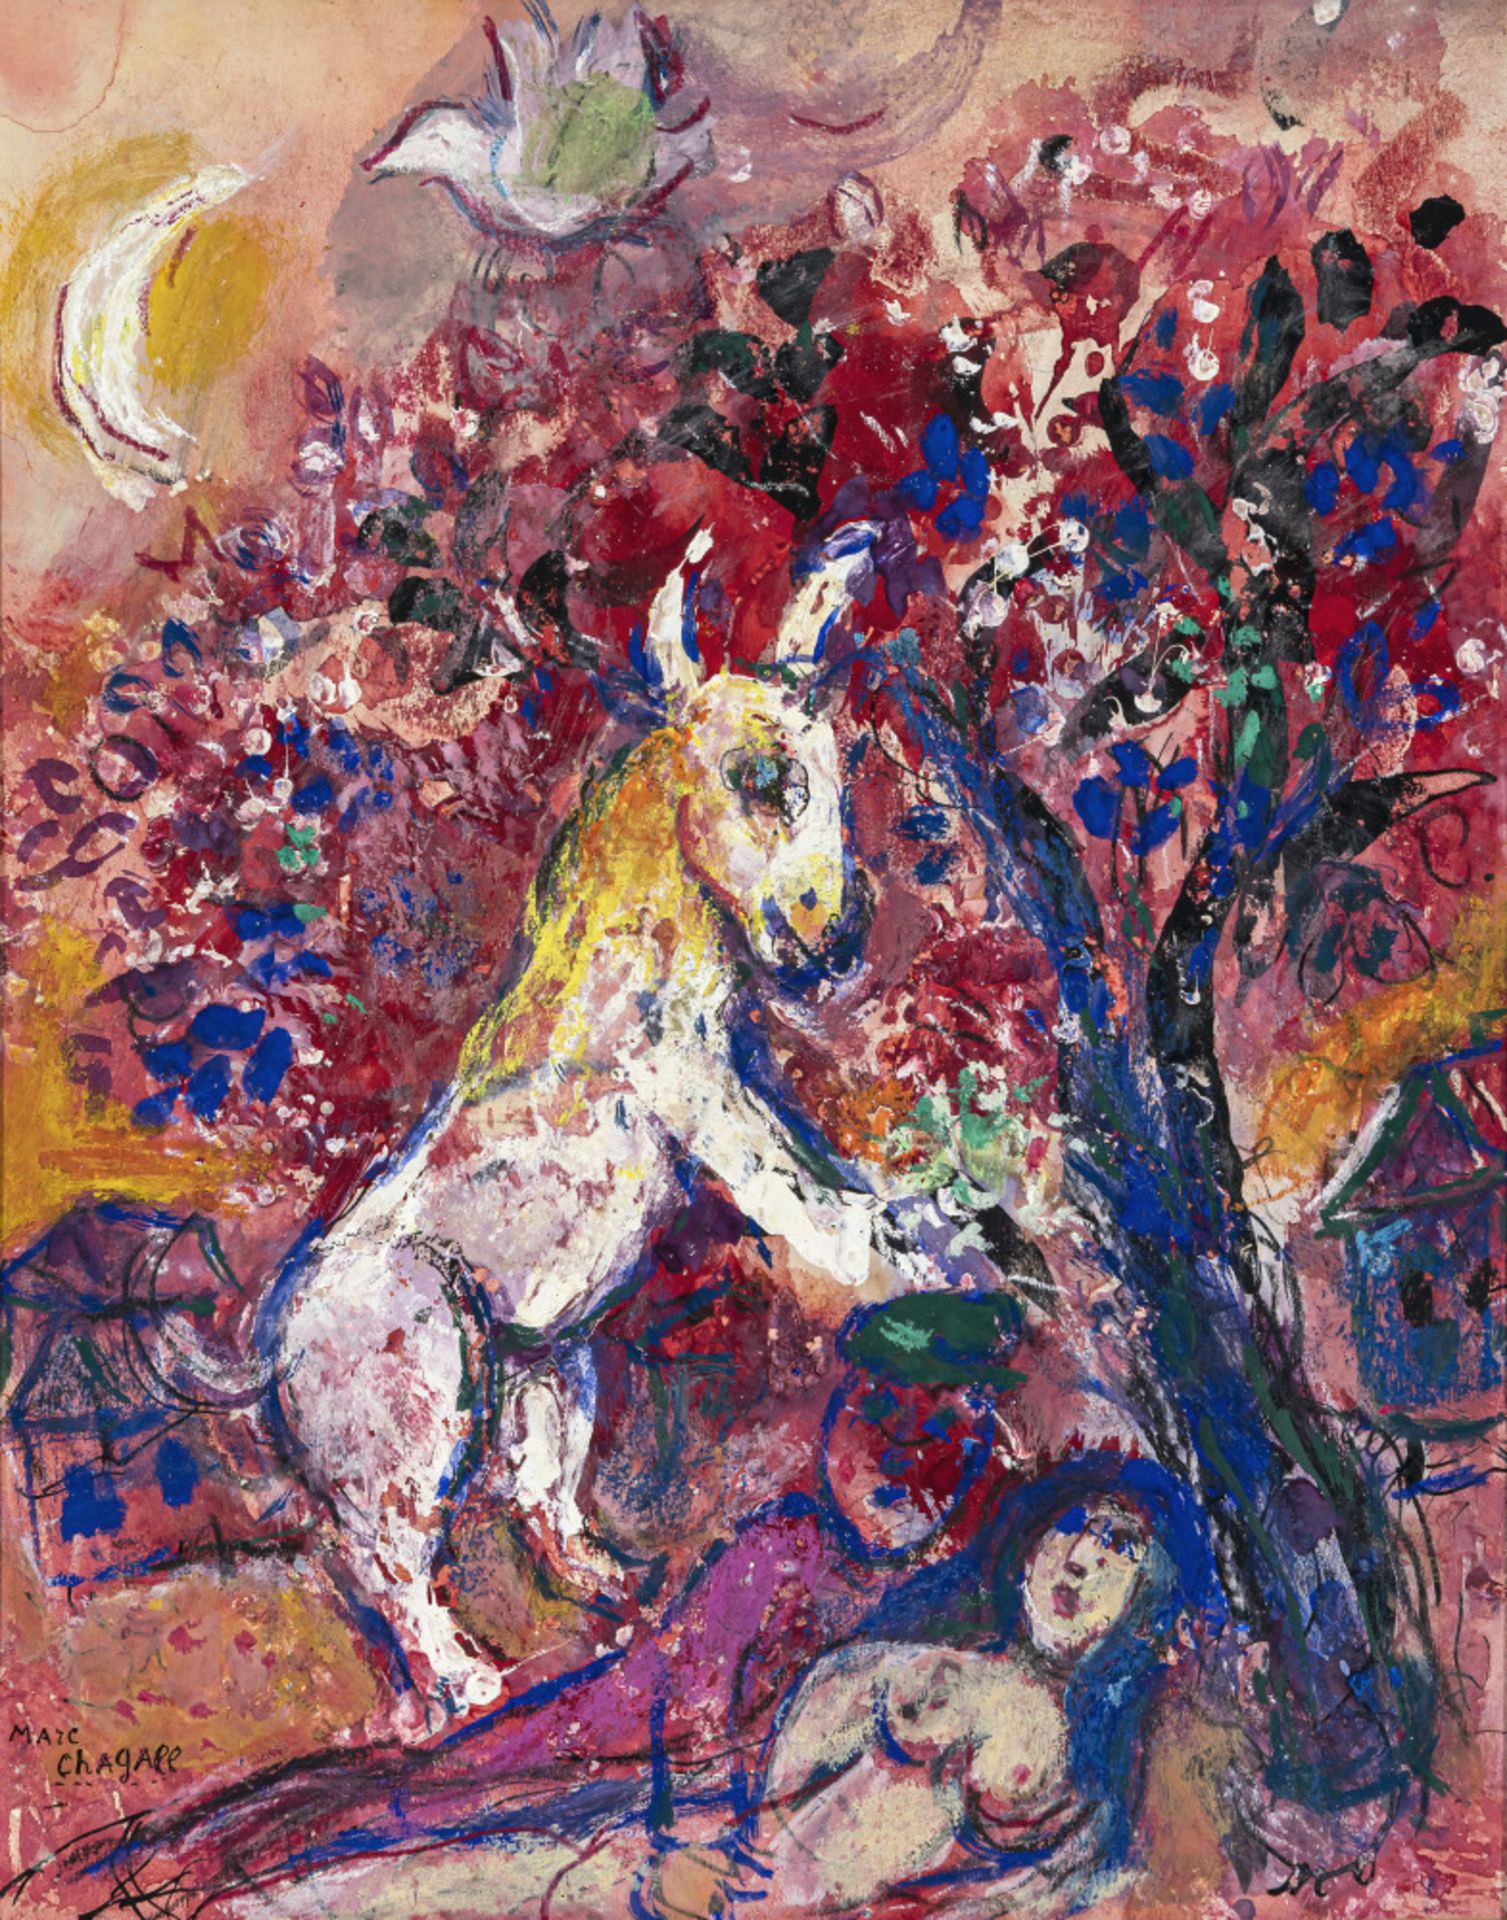 Marc Chagall - Les fiancés au pied de larbre. (The betrothed at the foot of the tree). 1956-1960